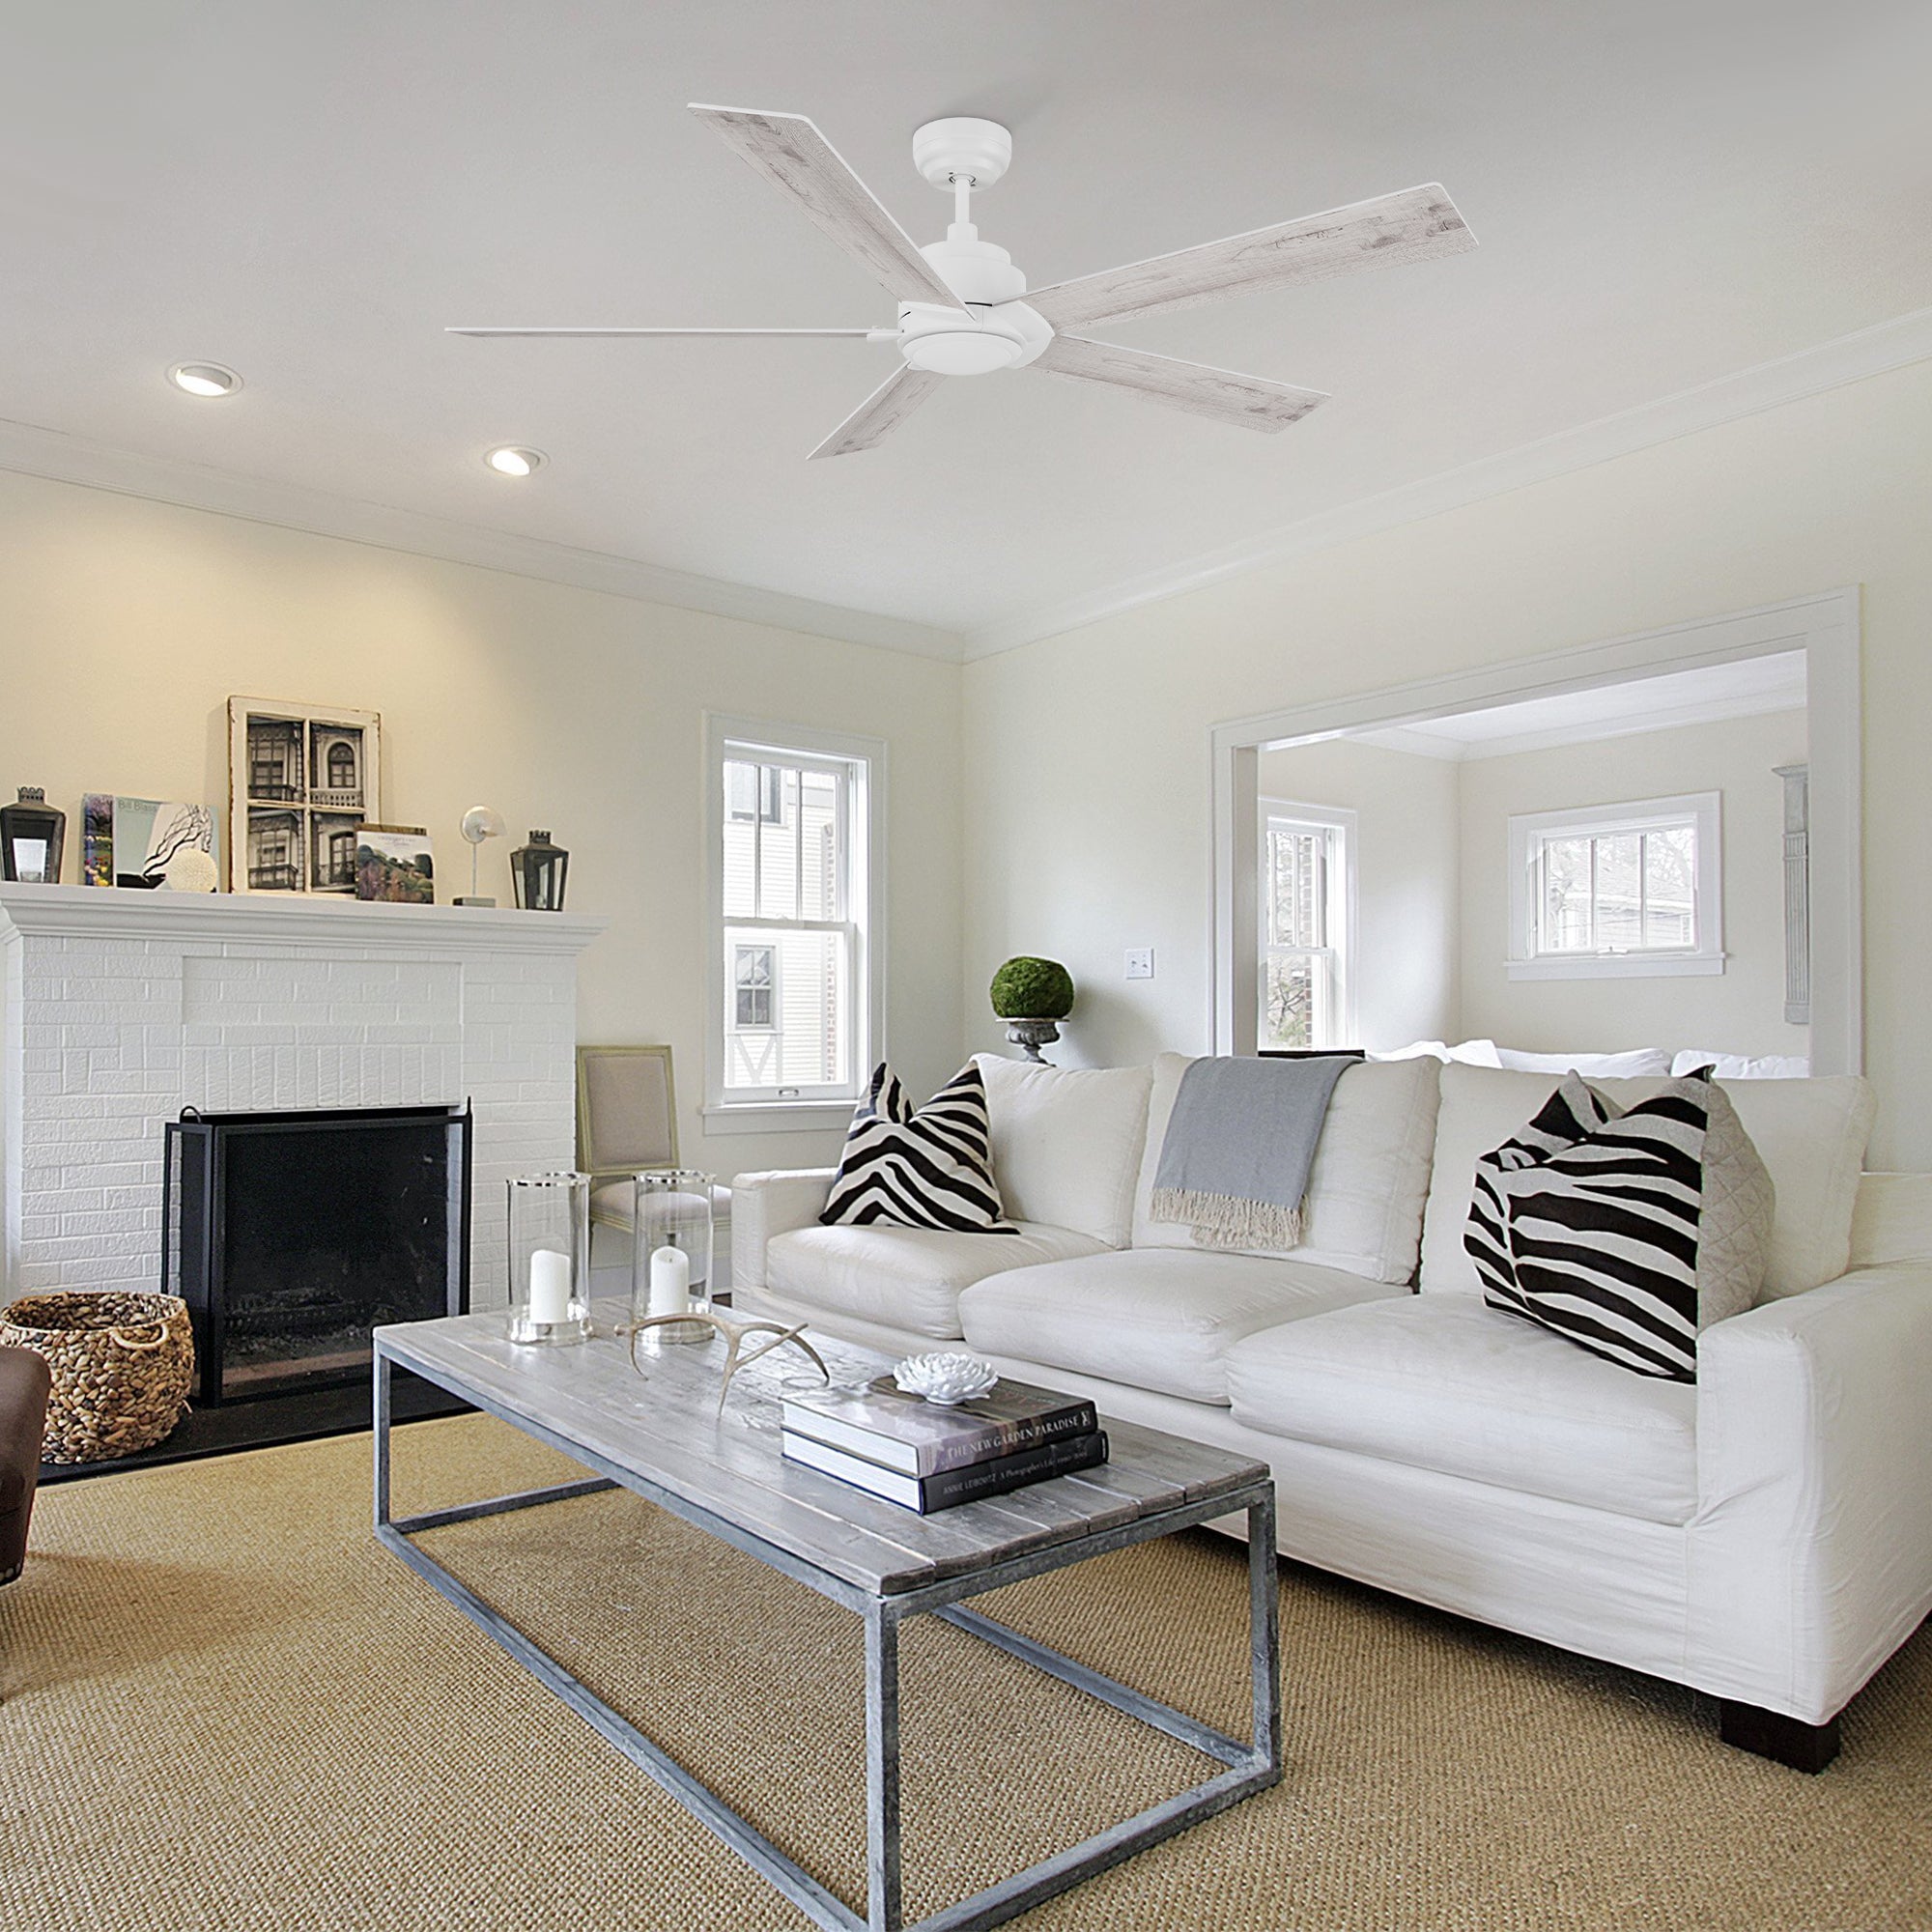 Carro Welland 60 inch remote control ceiling fans boasts a simple design with a White finish and elegant Plywood blades, will keep your living room cool and stylish. 